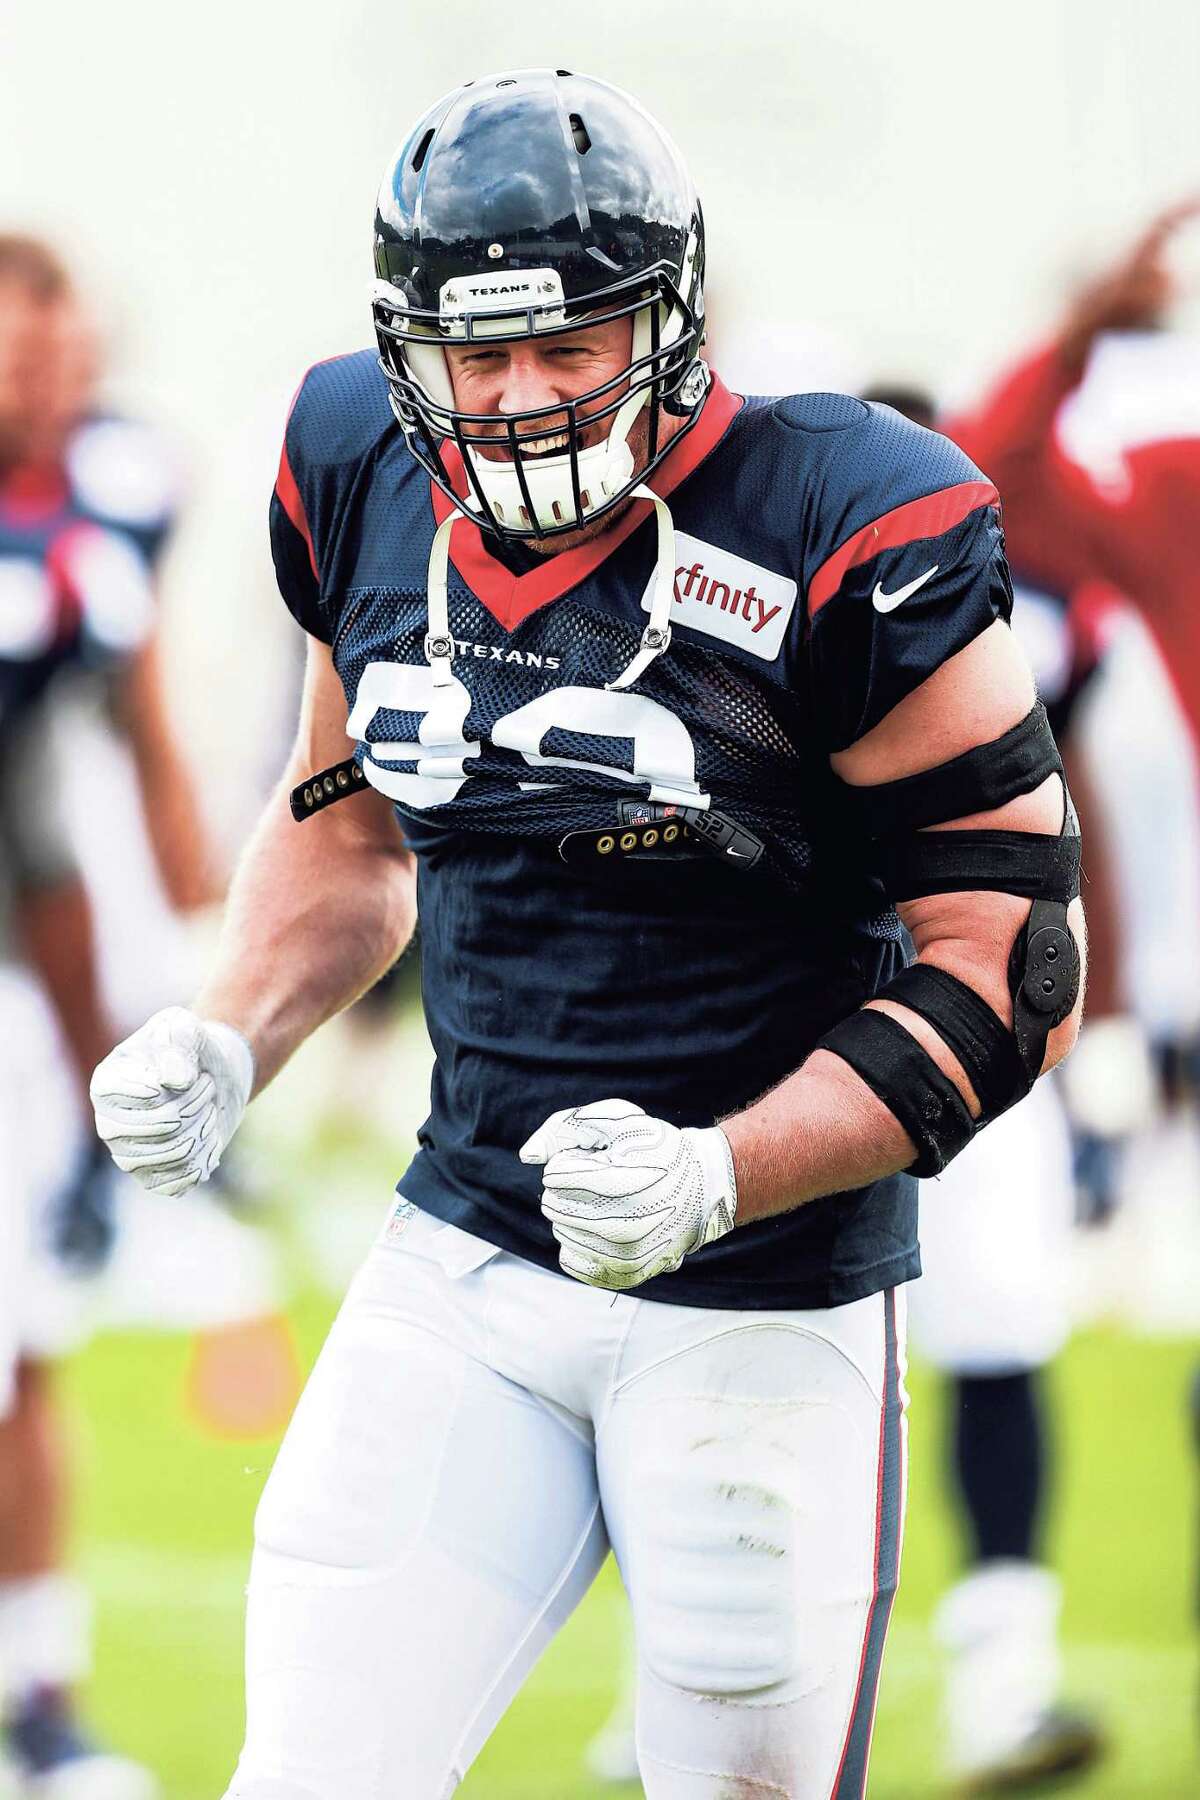 Houston Texans defensive end J.J. Watt (99) yells at the end of a drill during training camp at the Greenbrier on Saturday, July 29, 2017, in White Sulphur Springs, W.Va. ( Brett Coomer / Houston Chronicle )